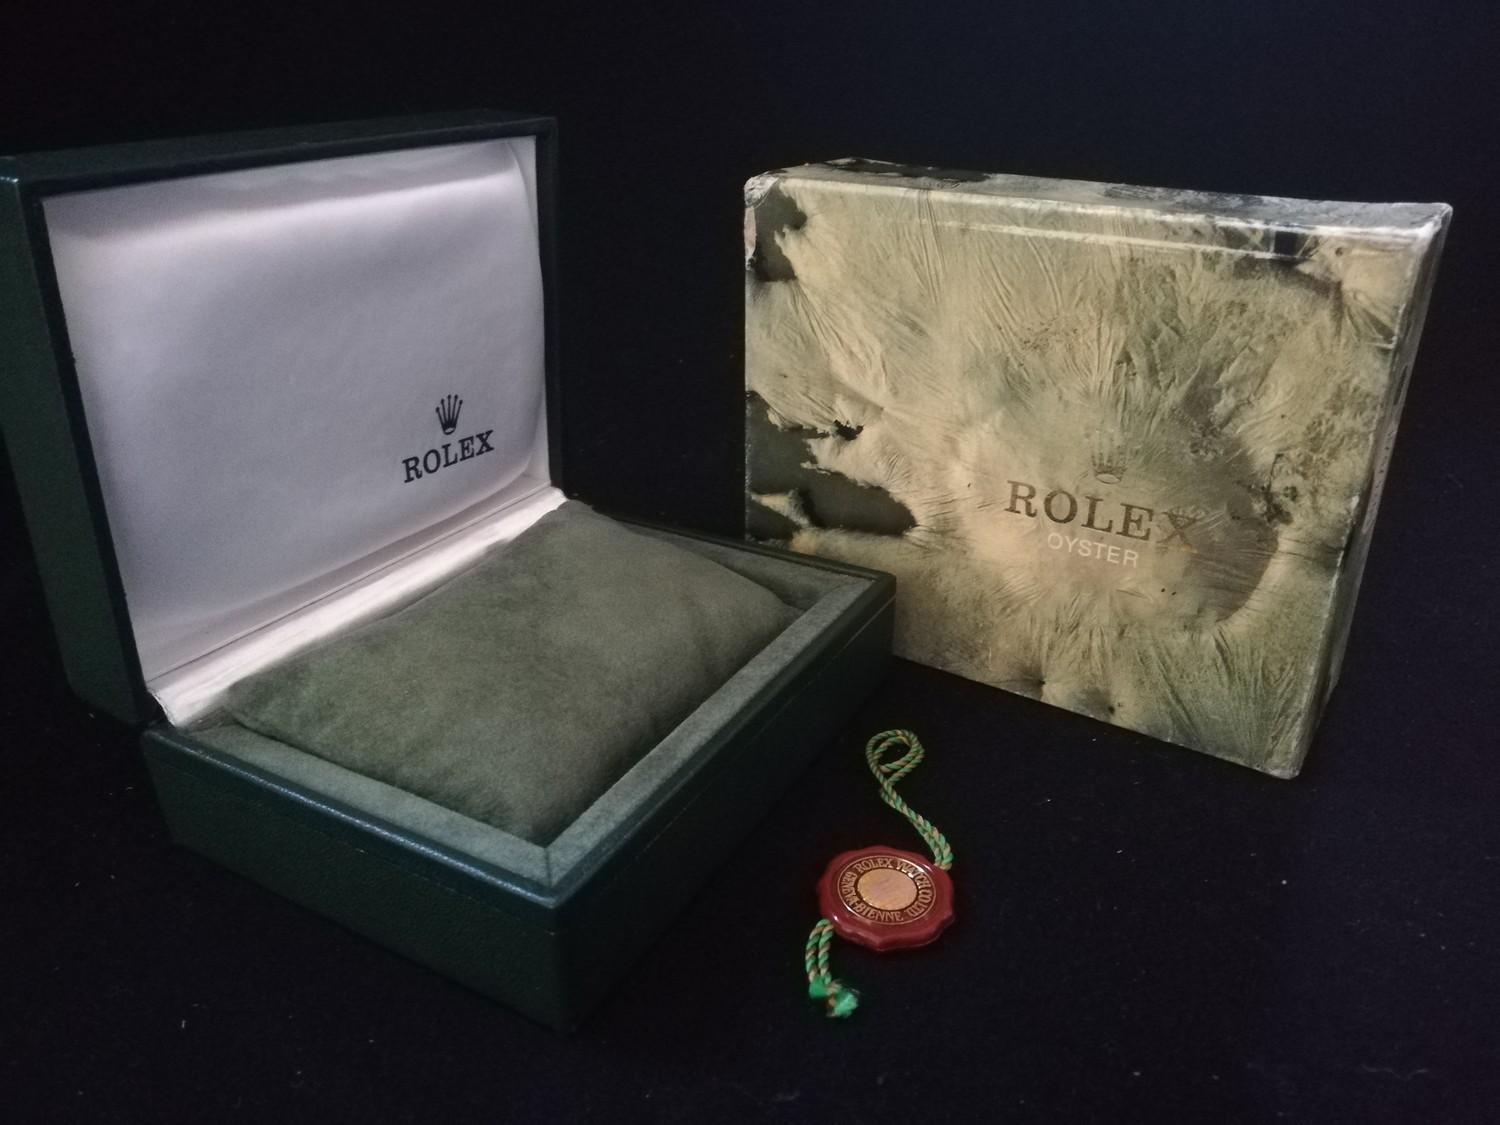 Rolex oyster green leather box t/w outer box & swingtag